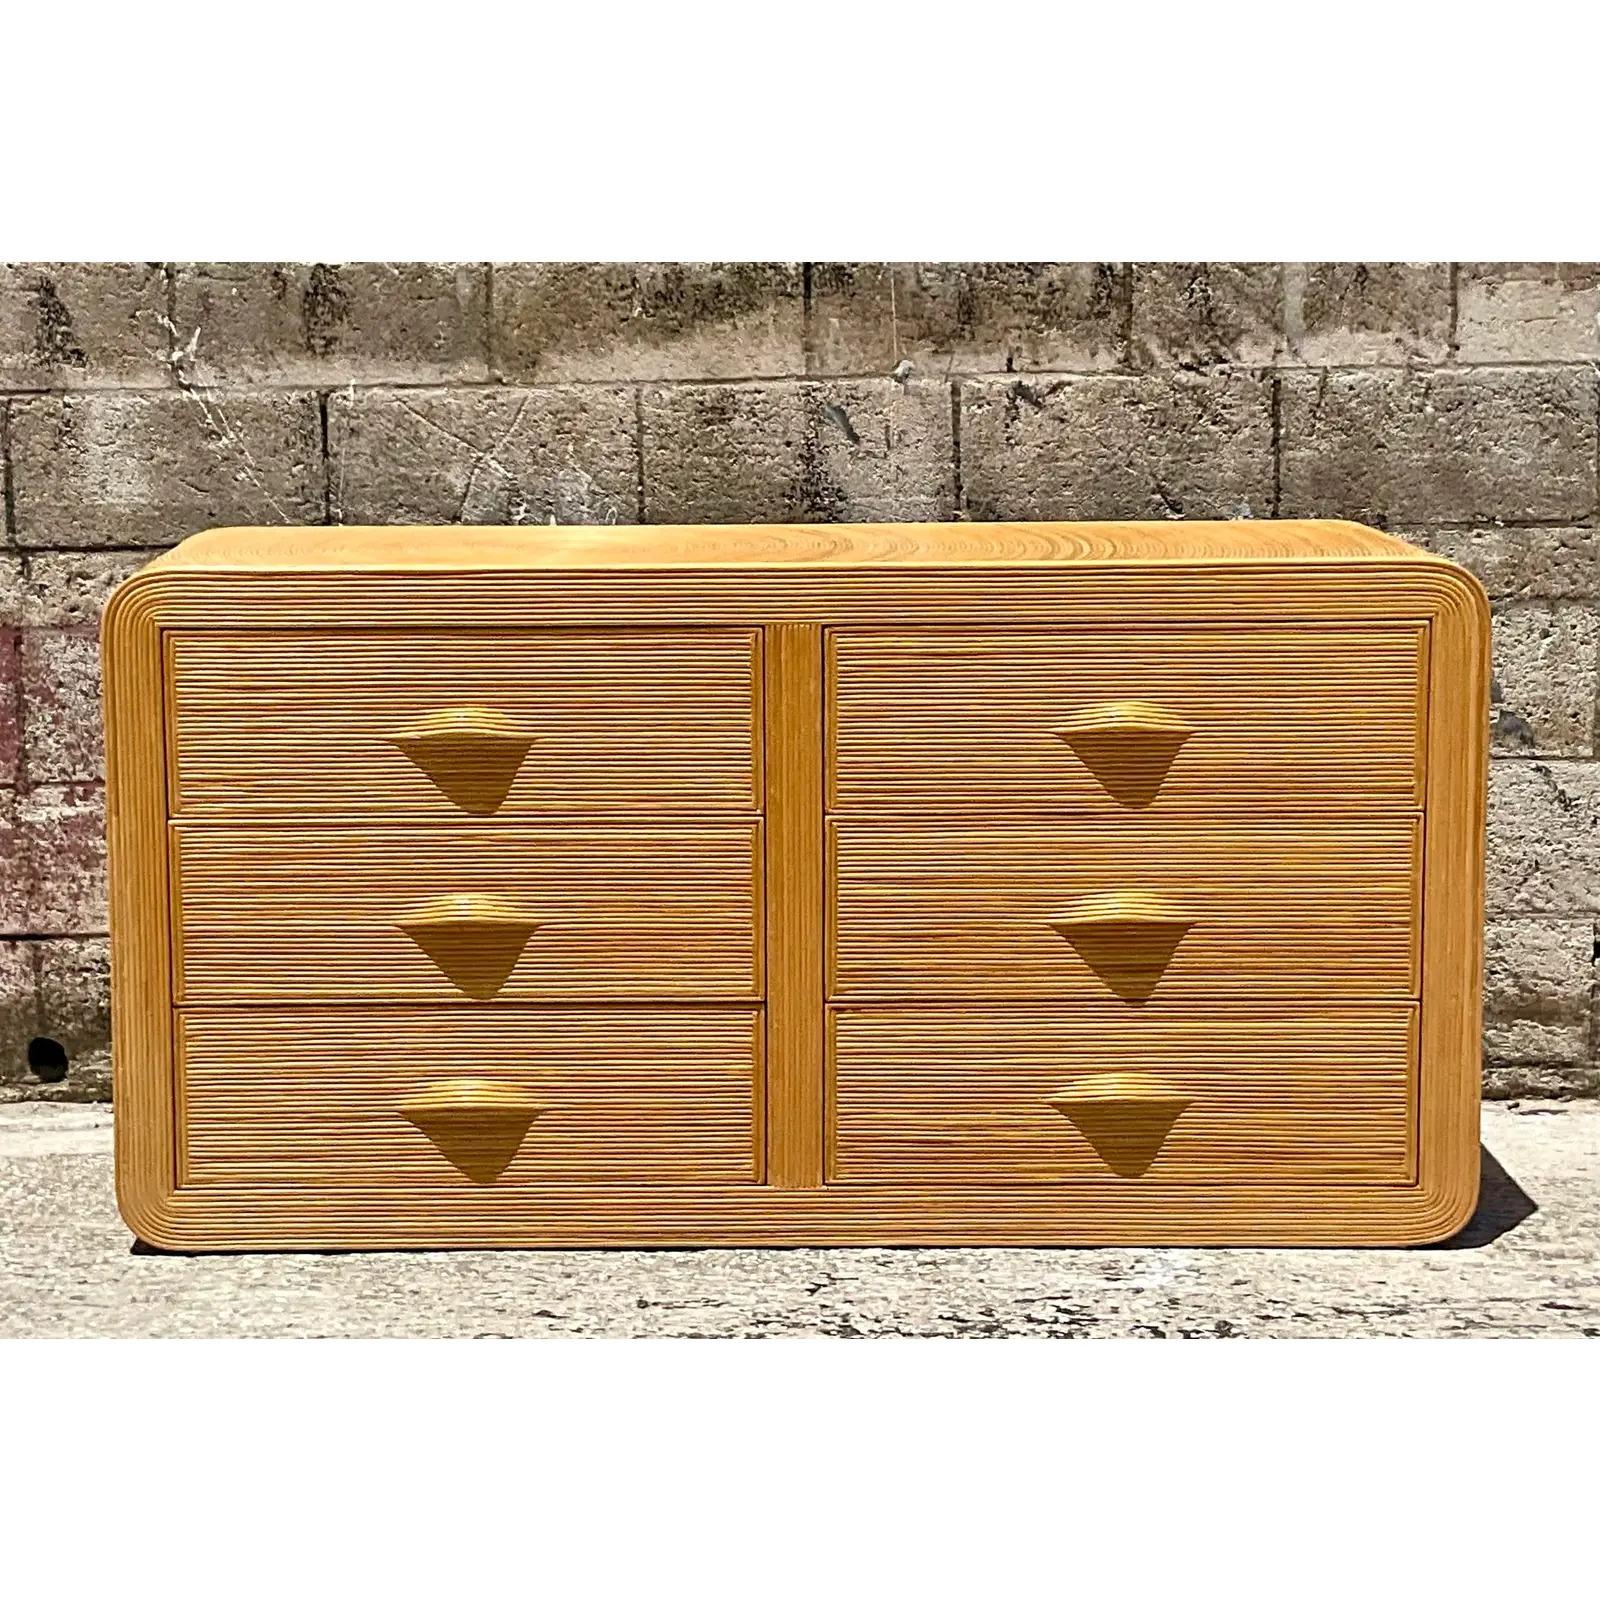 A fantastic vintage Coastal standard dresser. A stunning pencil reed cabinet in a chic starburst design. Beautiful waterfall edge. Acquired from a Palm Beach estate.